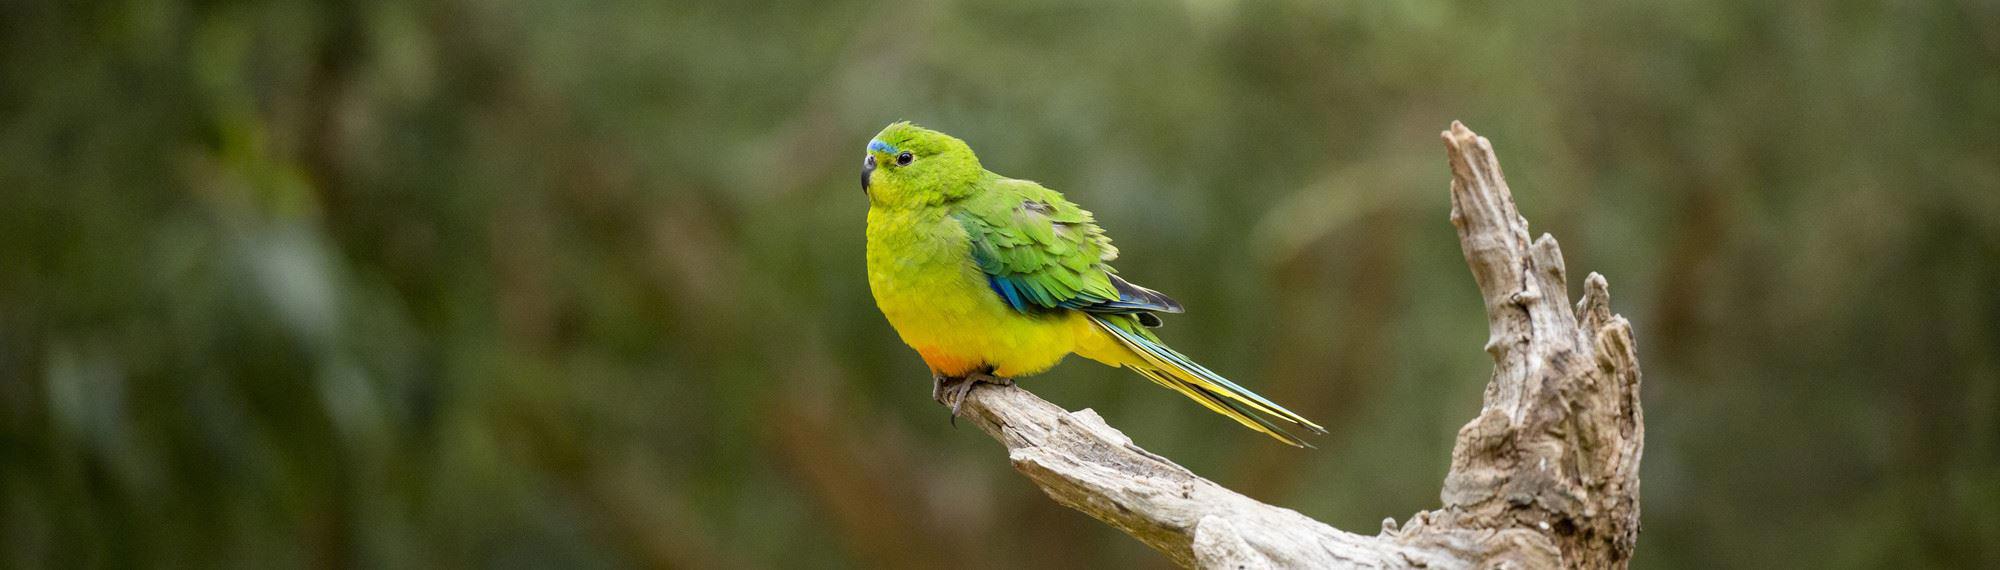 Side view of an Orange Bellied Parrot side perching on a tree branch and looking to the left. The parrot is grass green with yellow and blue and as the name suggests it has an orange belly.